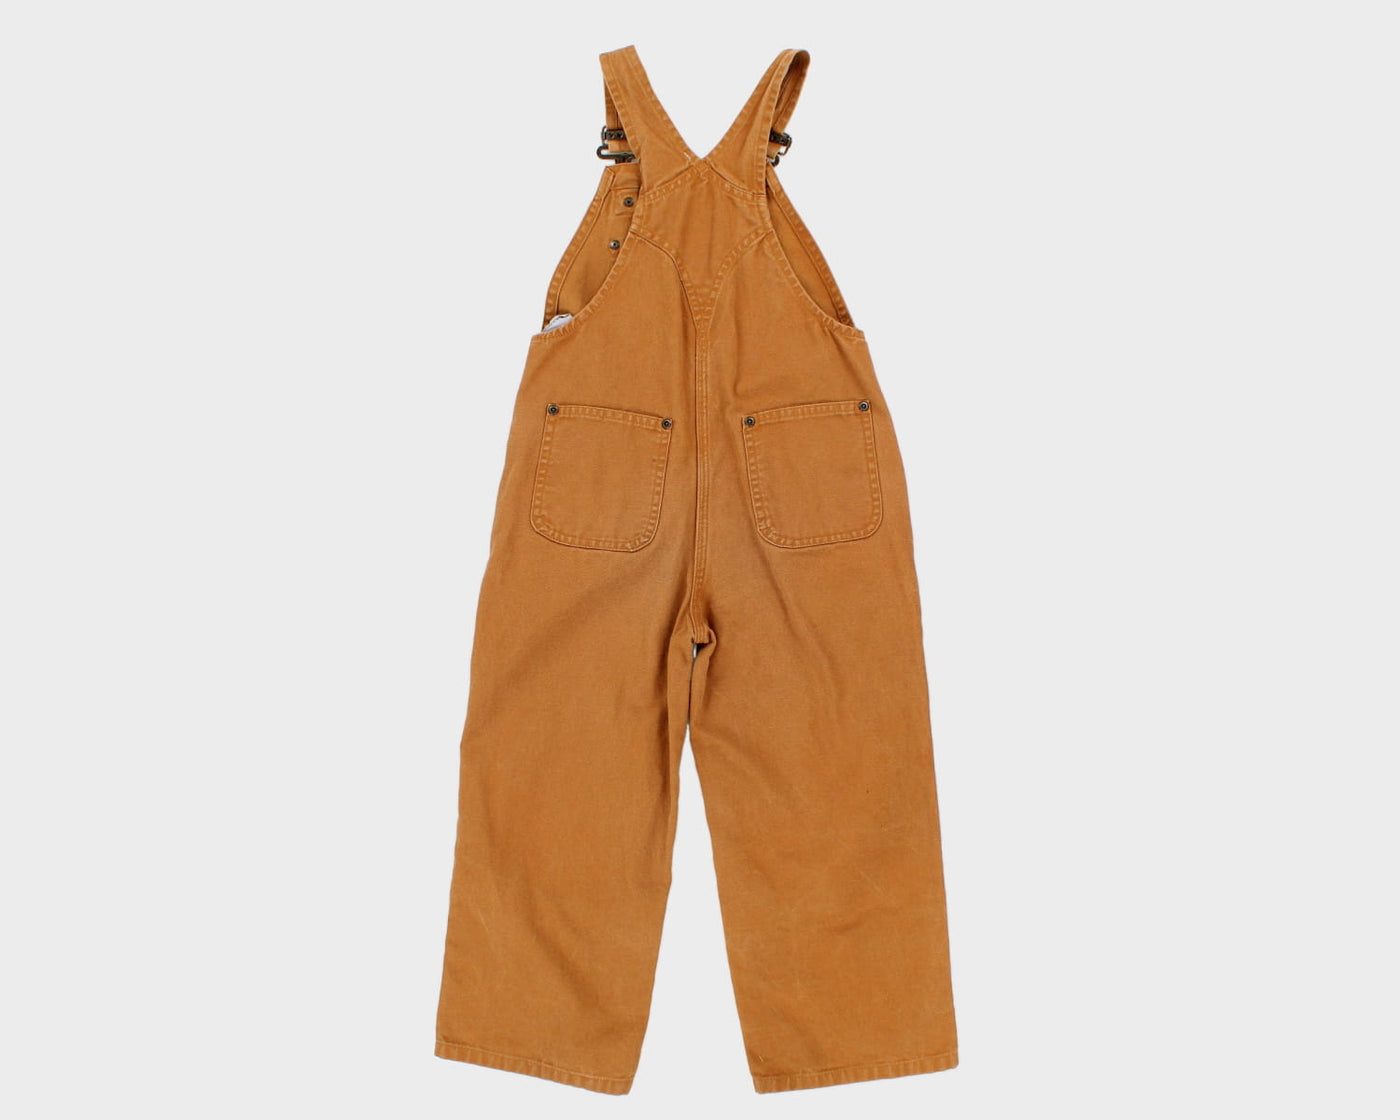 Kids Carhartt Dungarees Youth 5